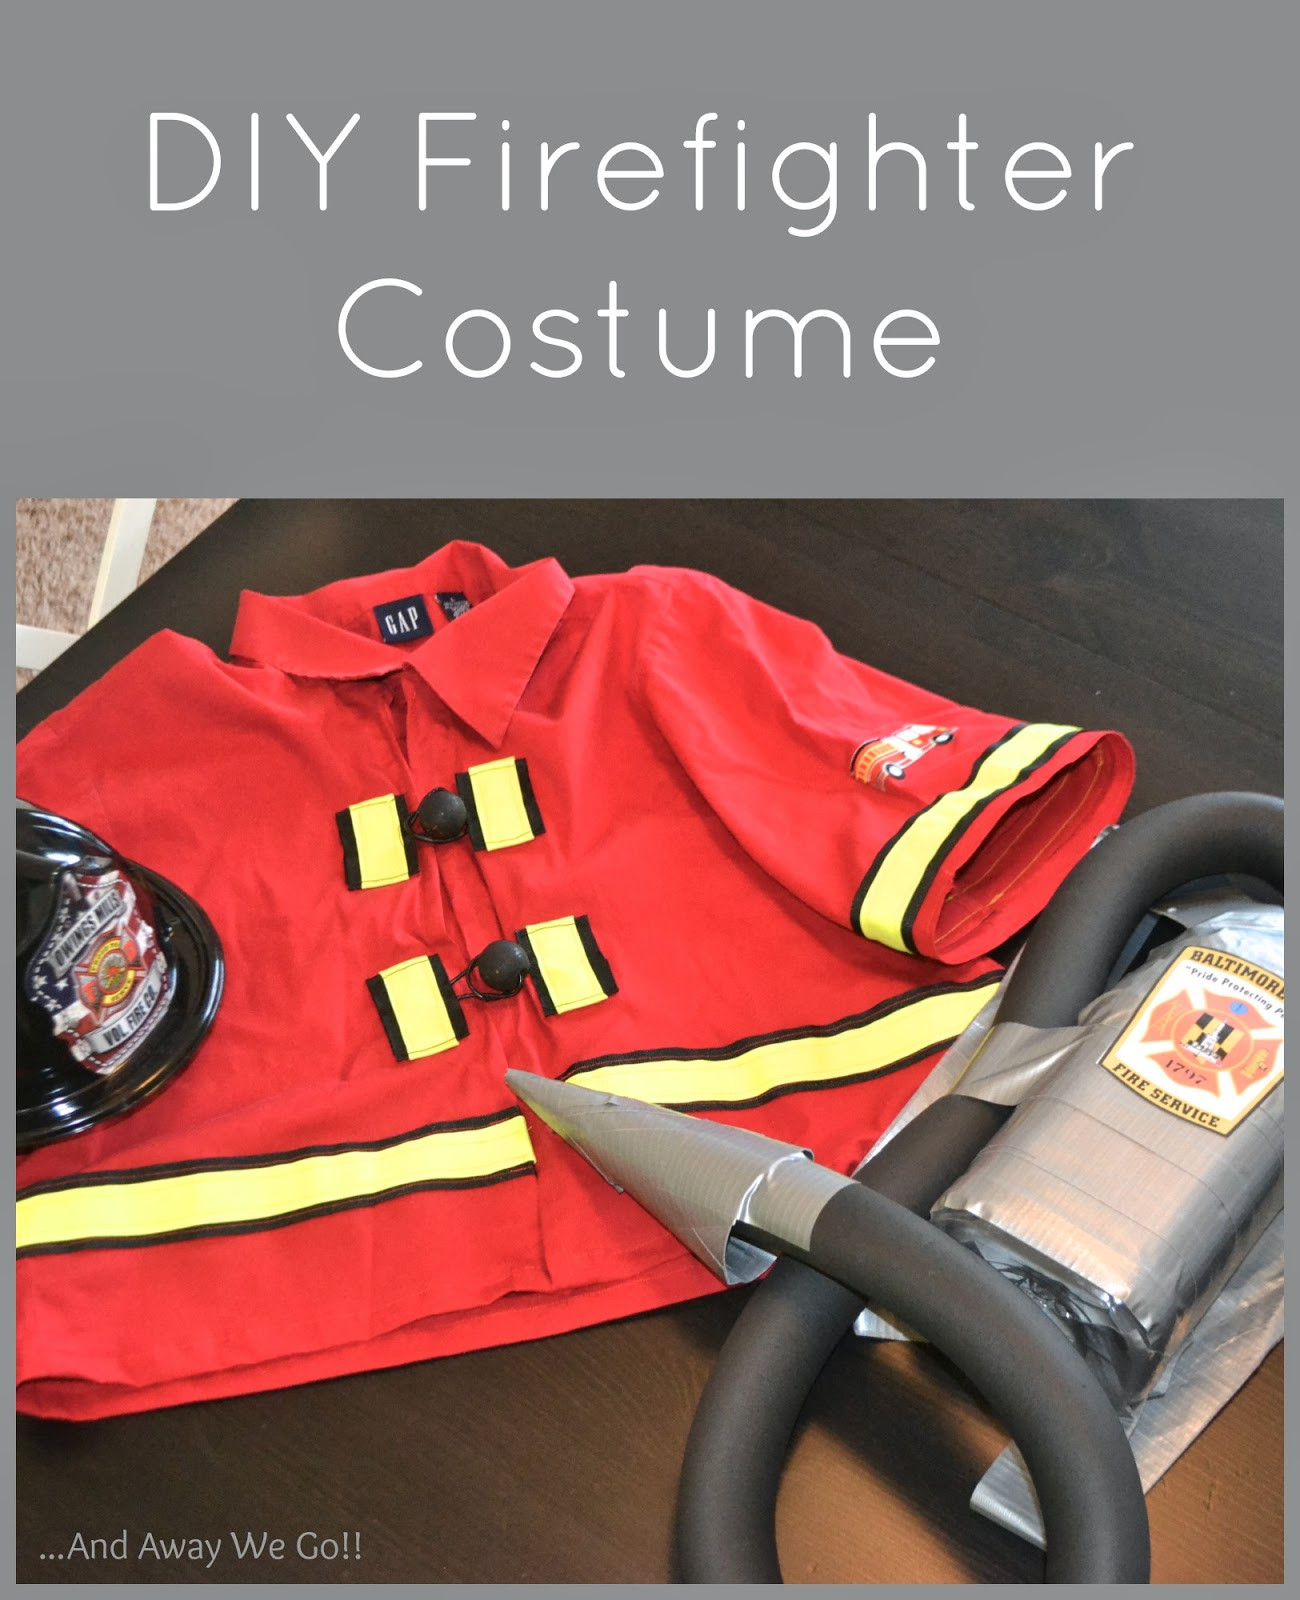 DIY Firefighter Costume
 and away we go DIY Firefighter Costume